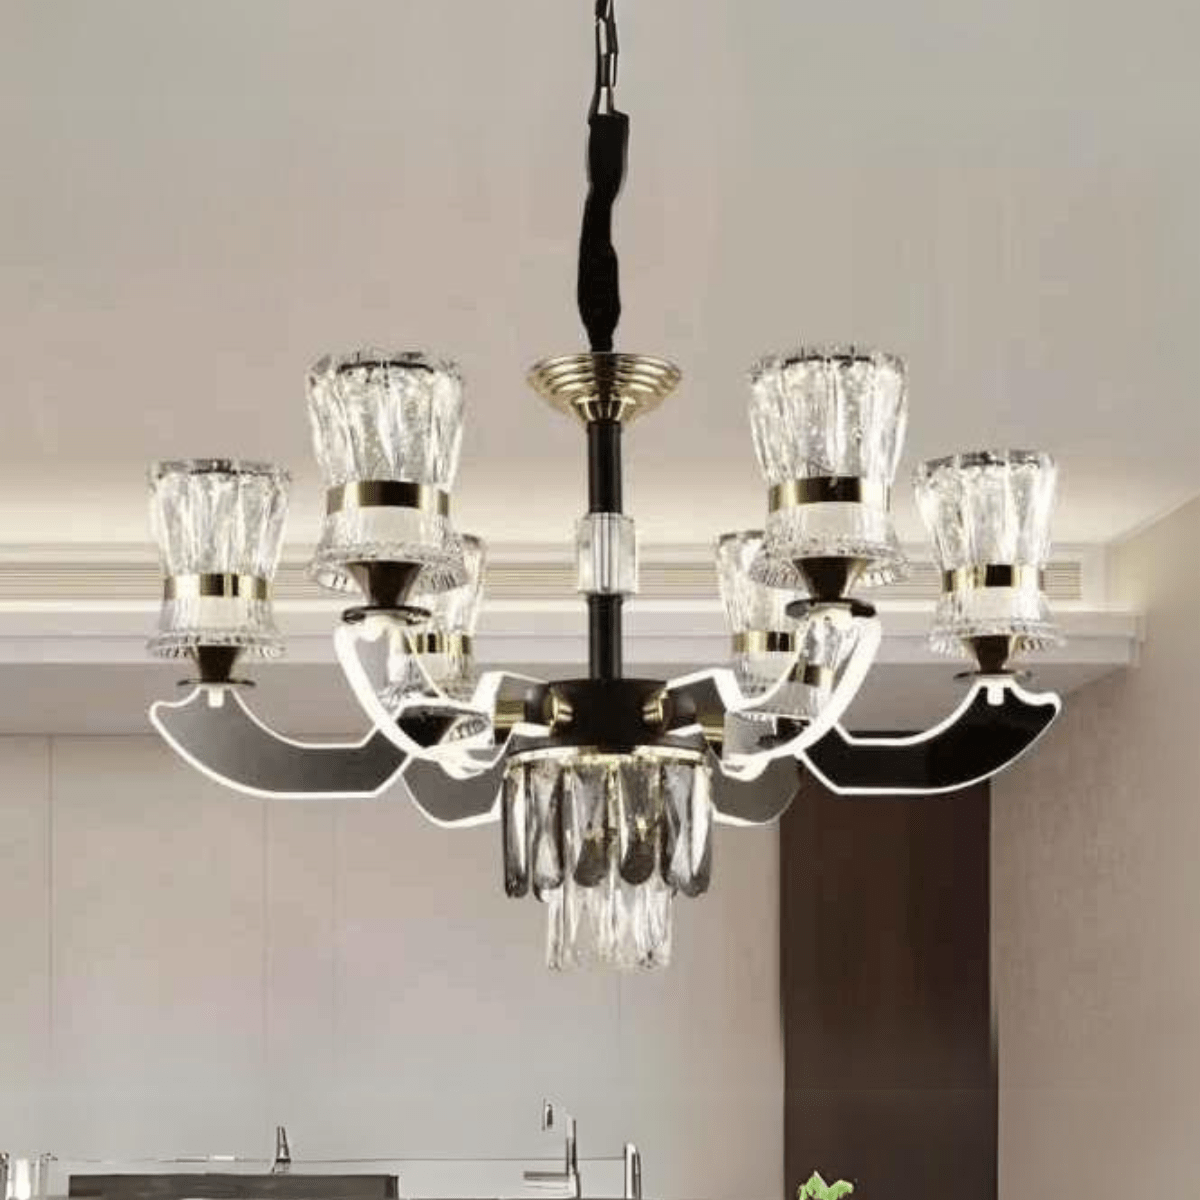 Buy Luxury Modern LED Sputnik Glass Crystal 6/12 Heads Ceiling Chandelier - CL-21-Series | Shop at Supply Master Accra, Ghana Lamps & Lightings 6 Heads Buy Tools hardware Building materials